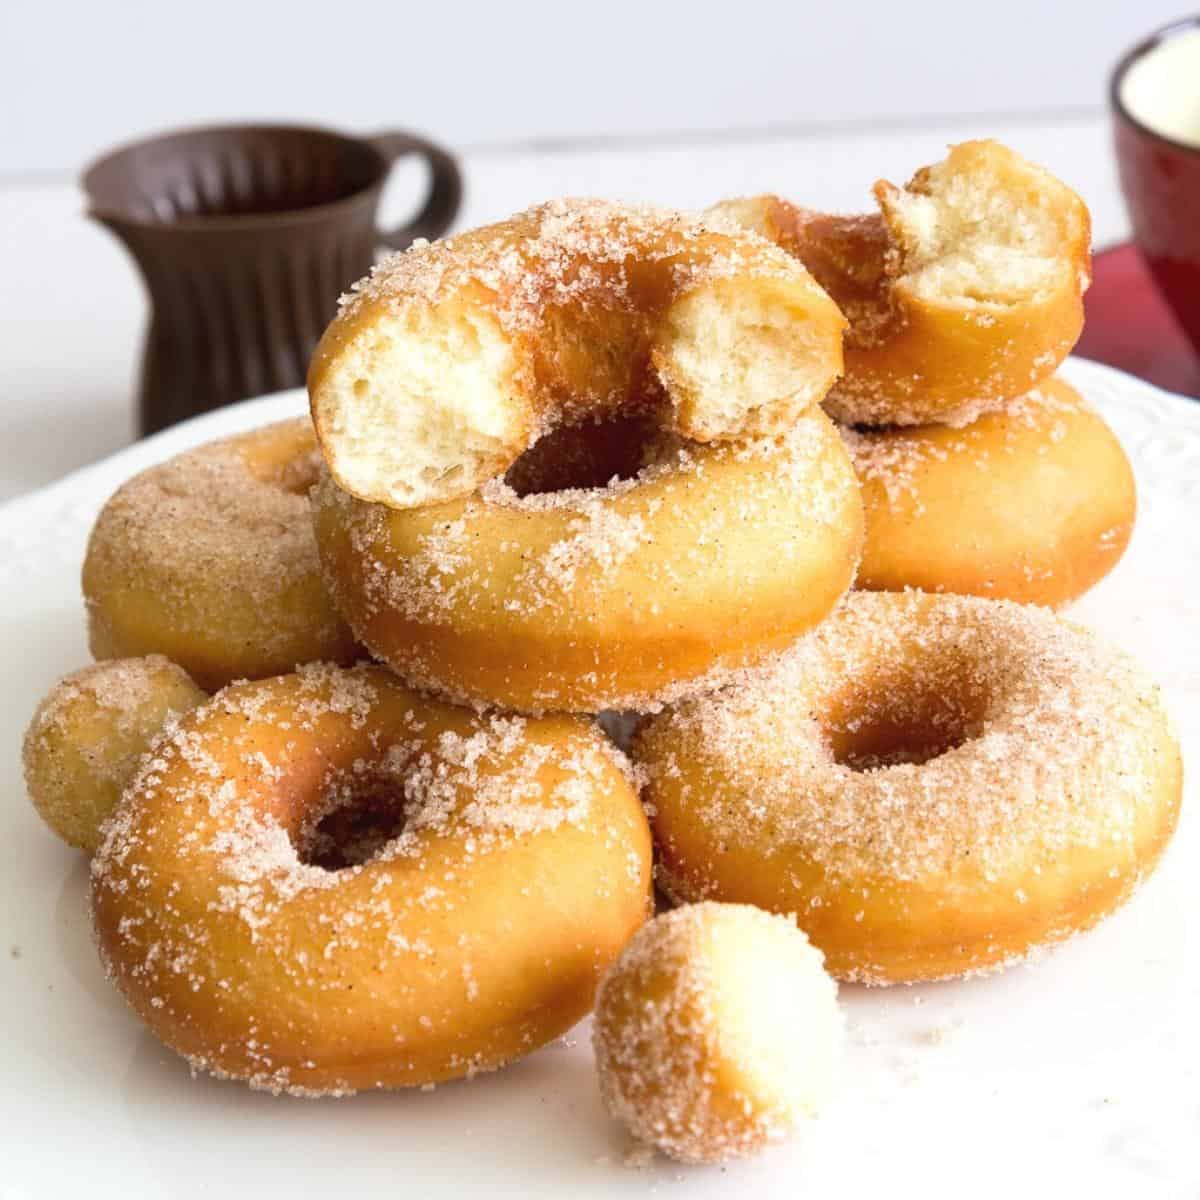 Donuts on a cake stand.